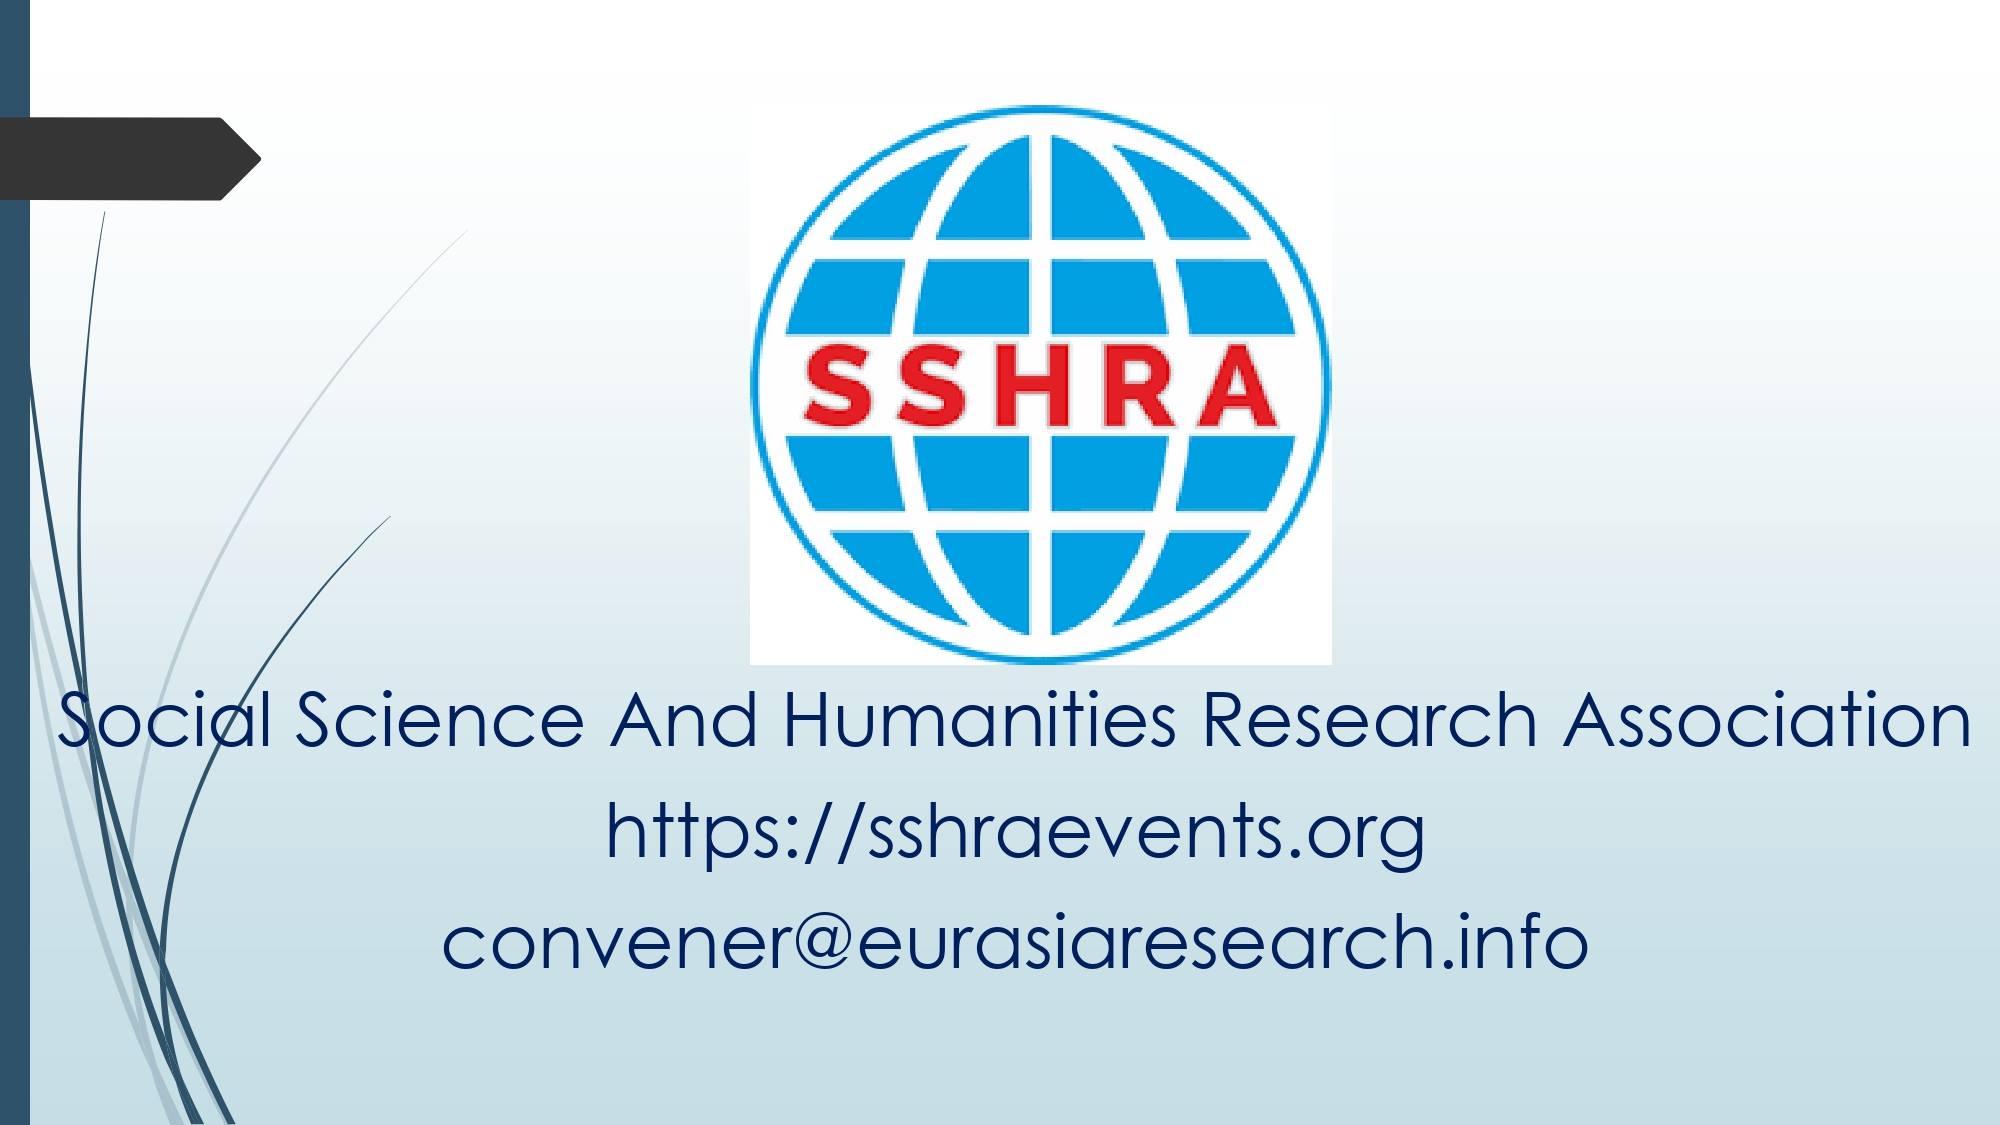 Barcelona – International Conference on Social Science & Humanities (ICSSH), 08-09 March 2022